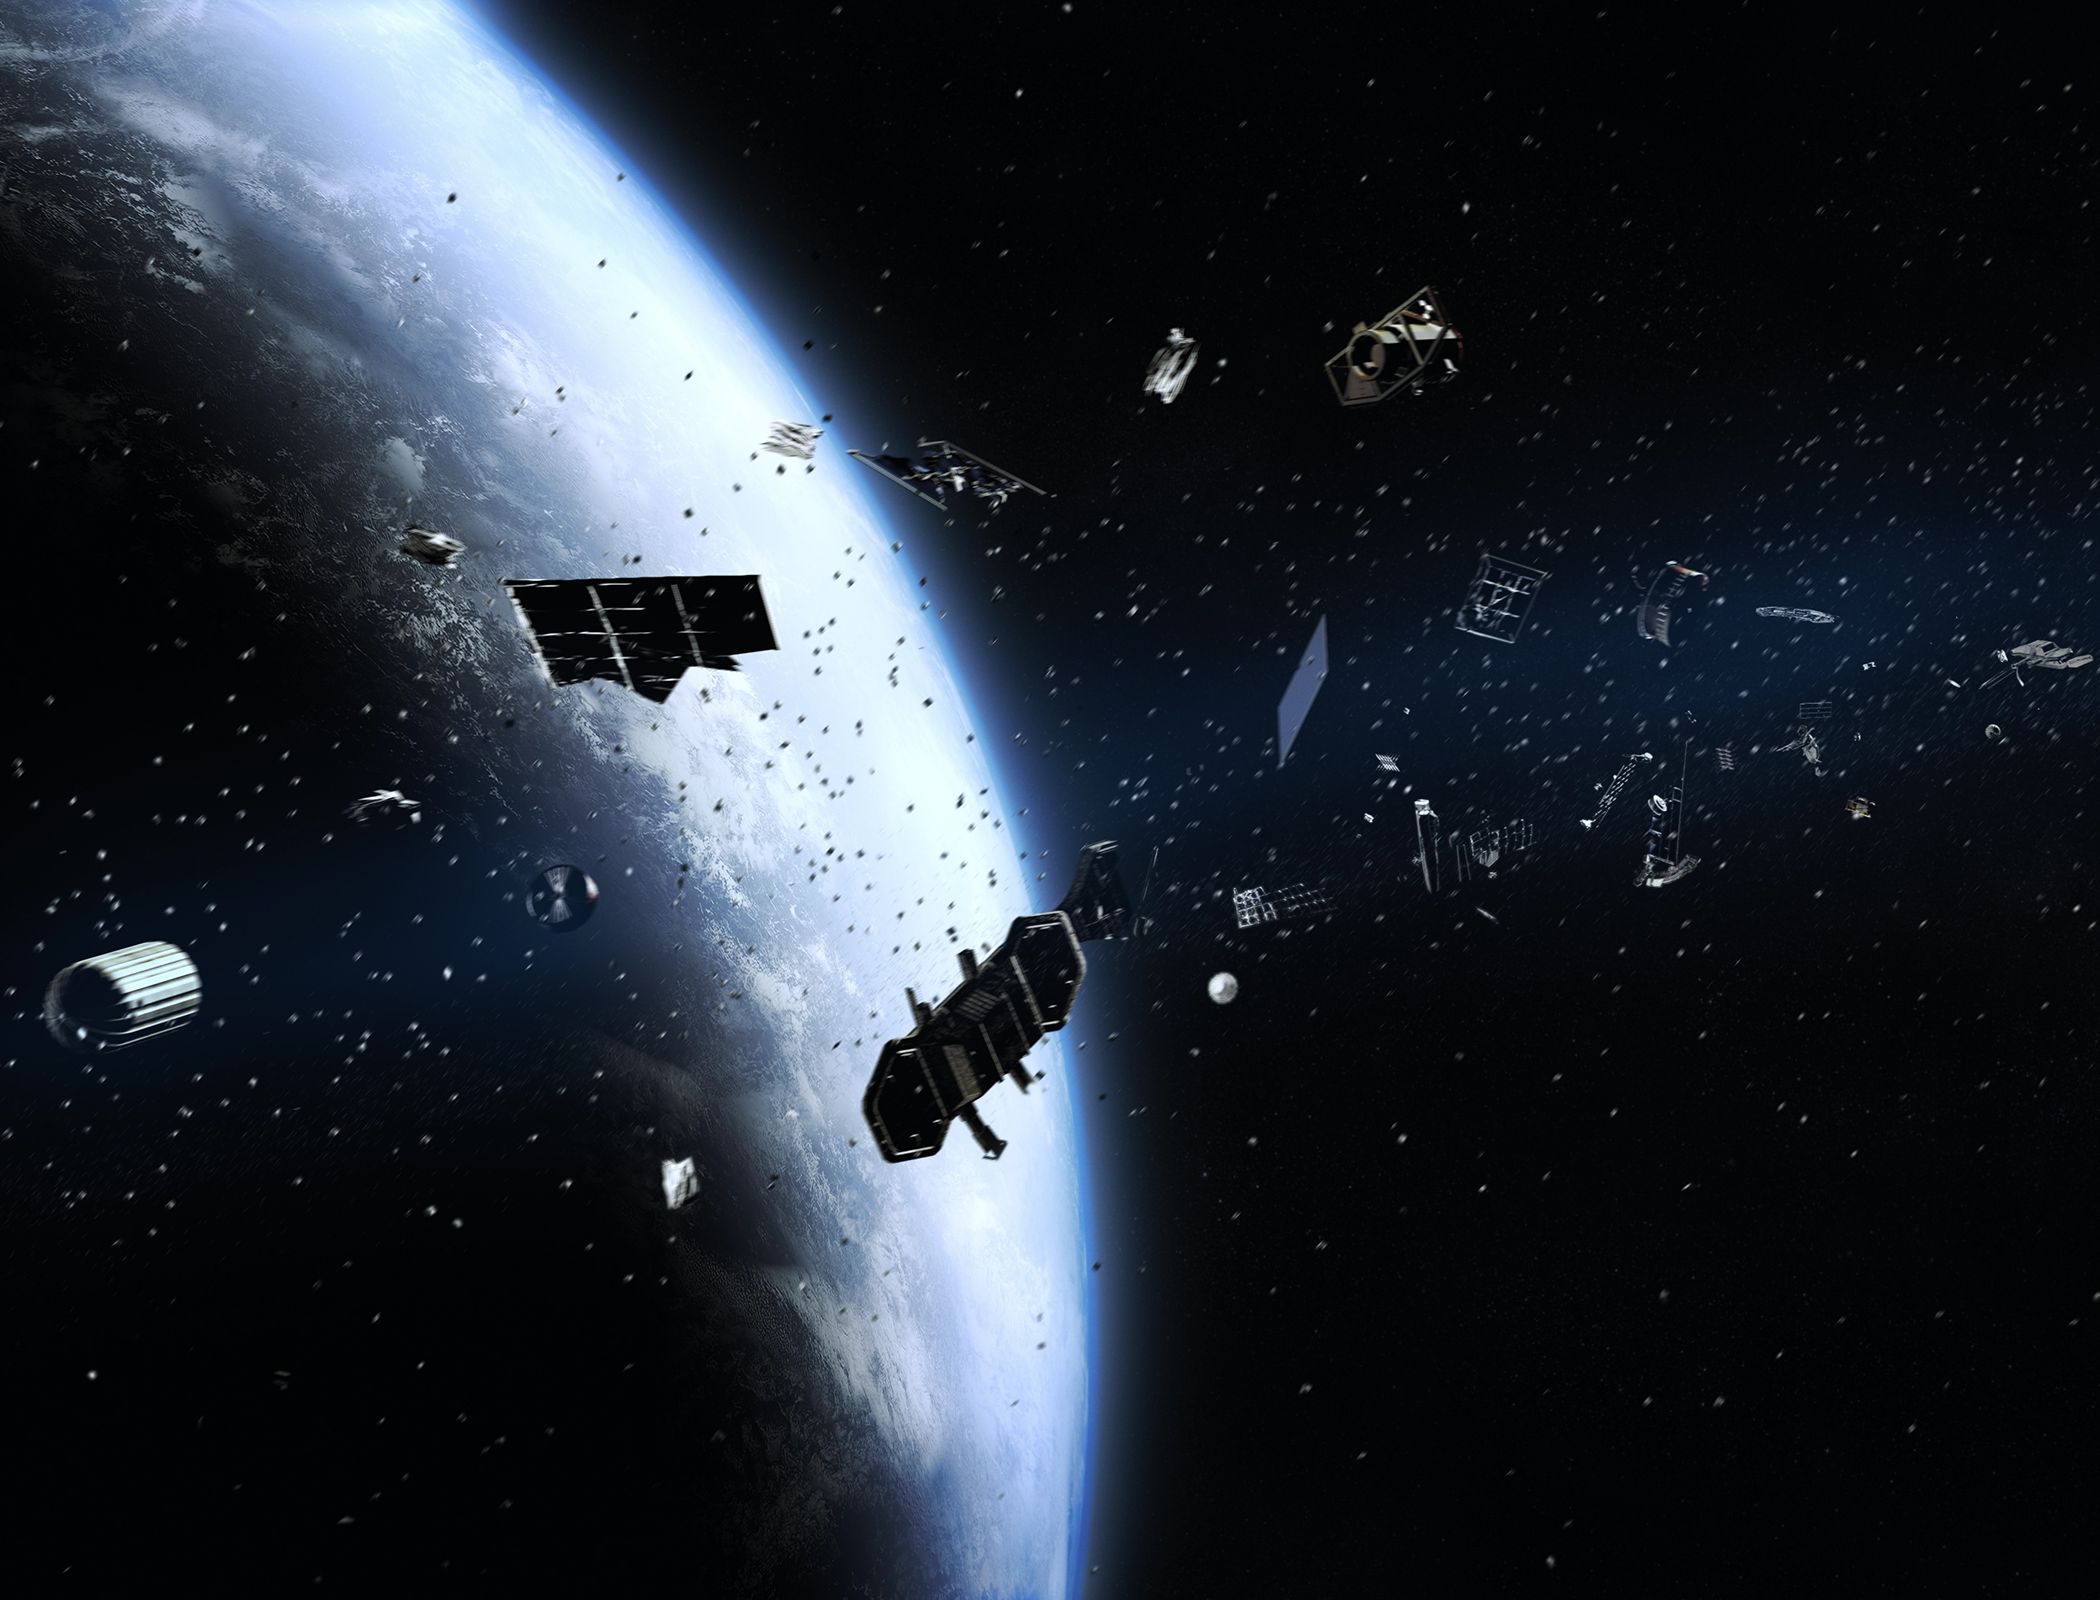 Low-cost cube satellite offers solution to space junk problem